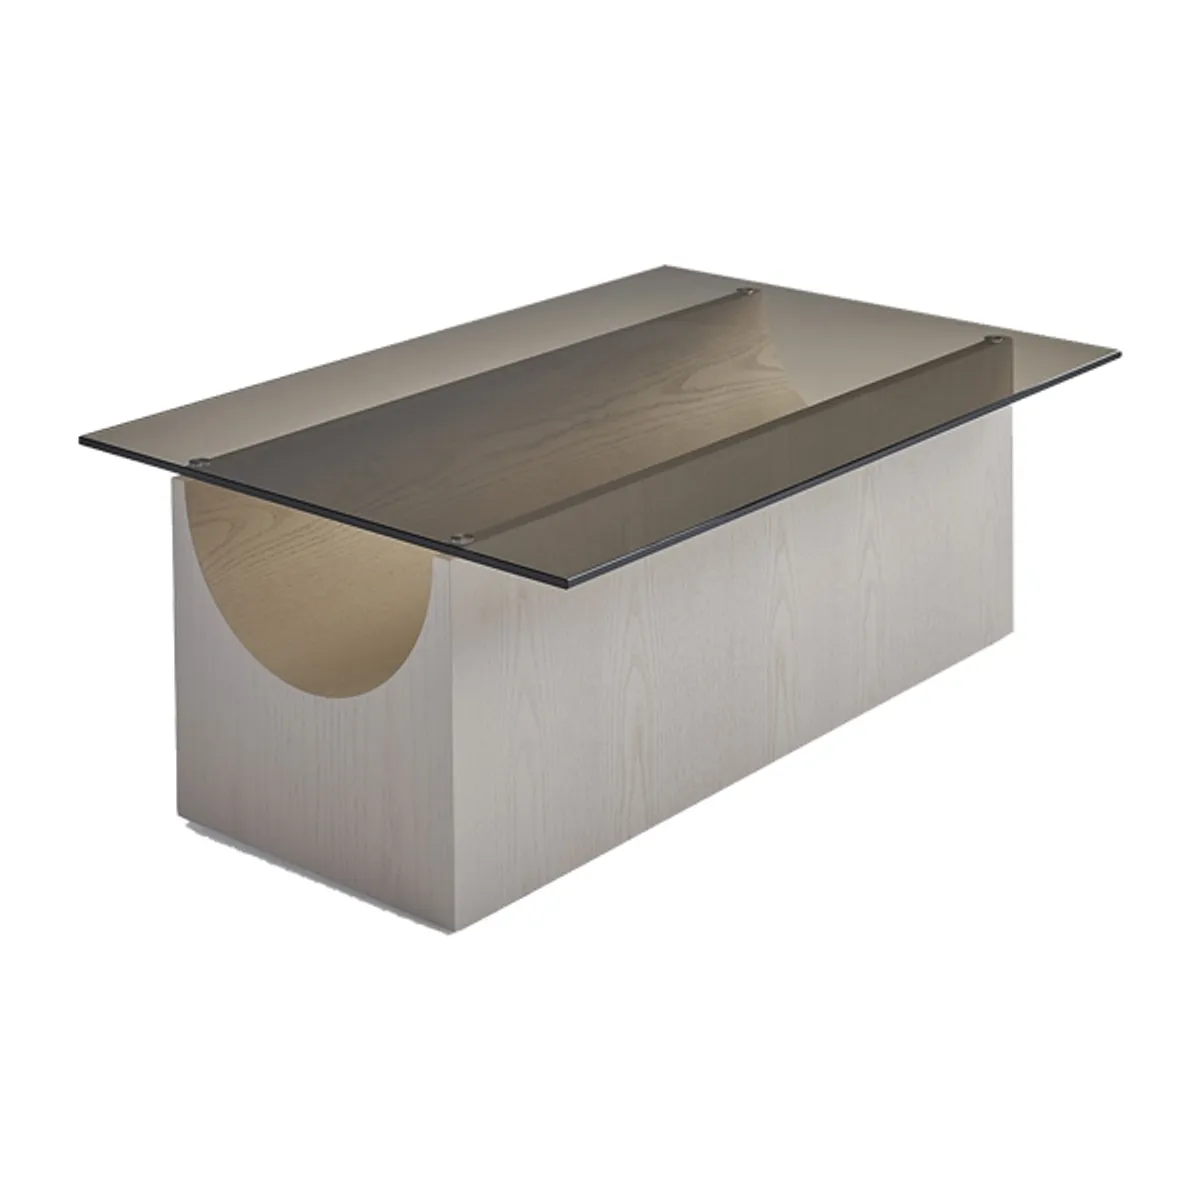 Vestige square coffee table Inside Out Contracts8